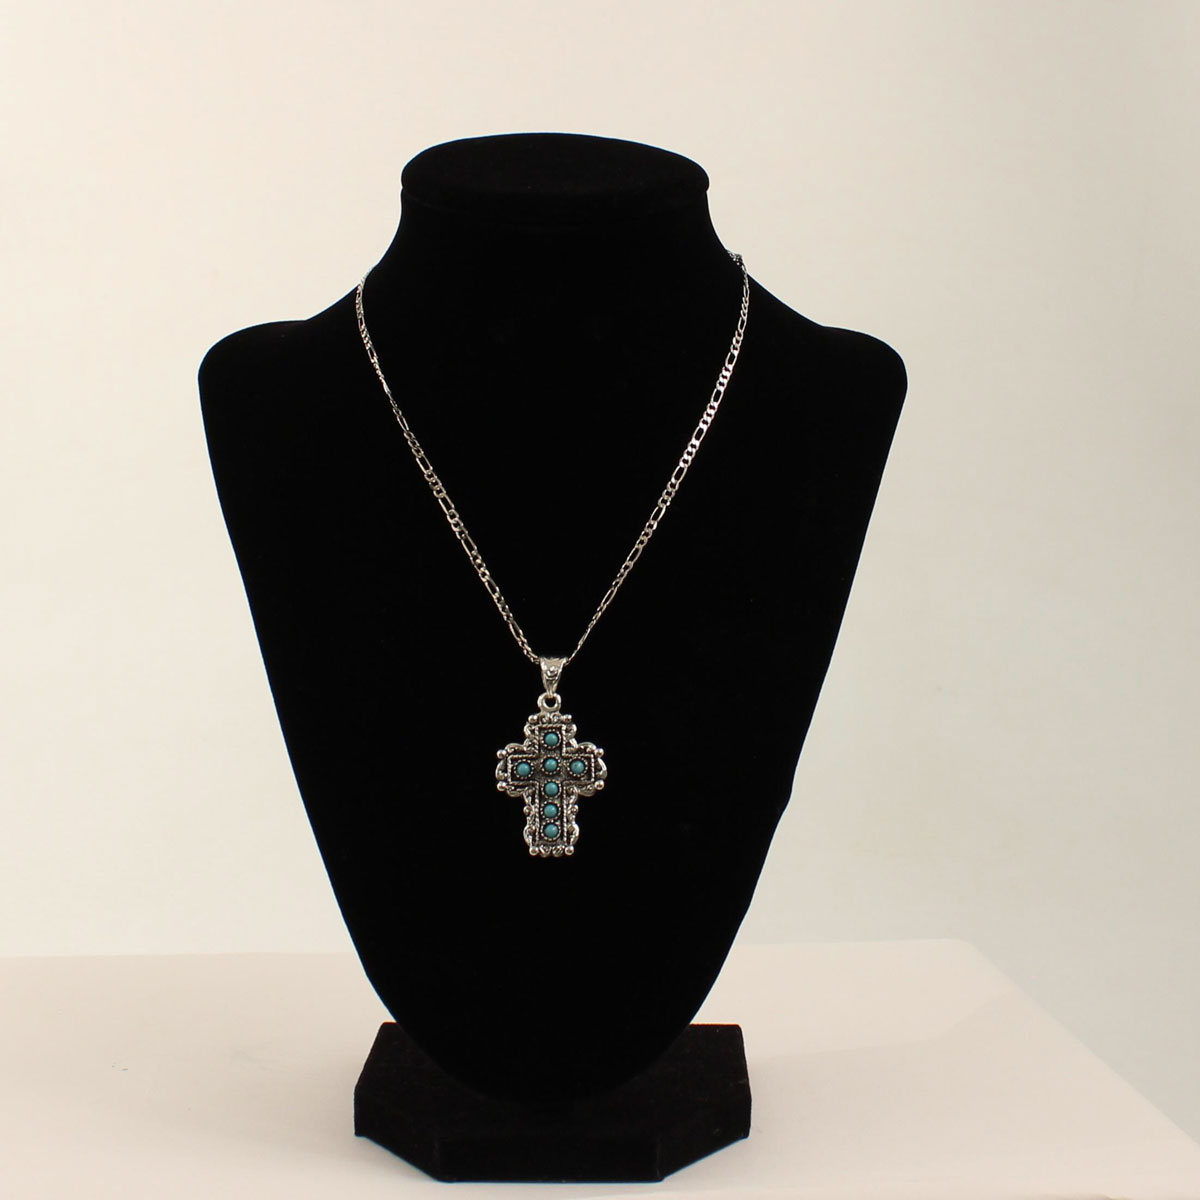 Dn159 Filigree Outline Cross Silver Strike Necklace, Silver With Turquoise - 1 X.75 In.